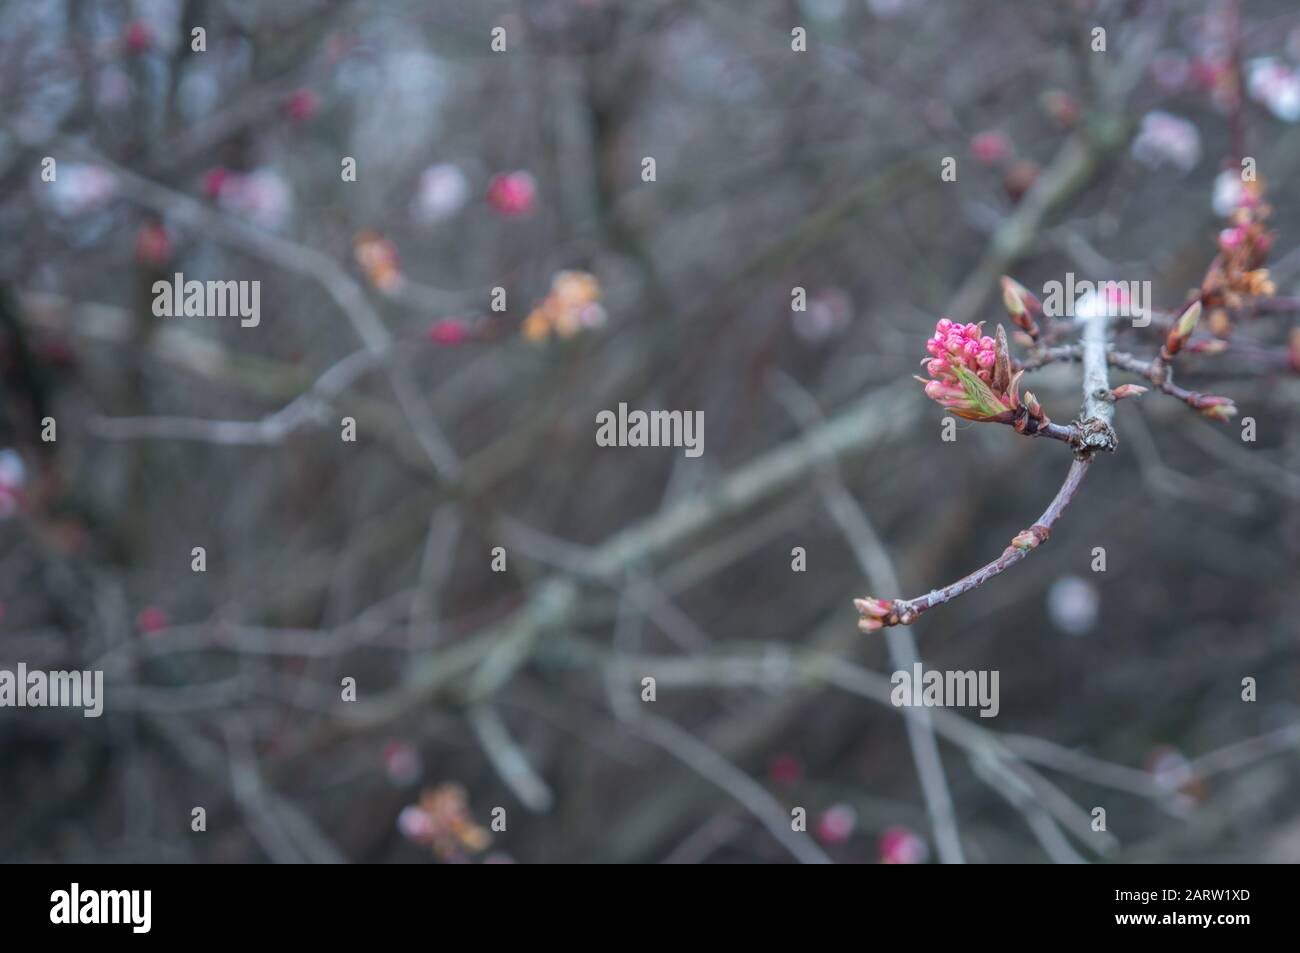 Cool toned close up of deep pink flower buds on a brach off center. Blurred tangled branches in the background. Romantic and crisp theme Stock Photo